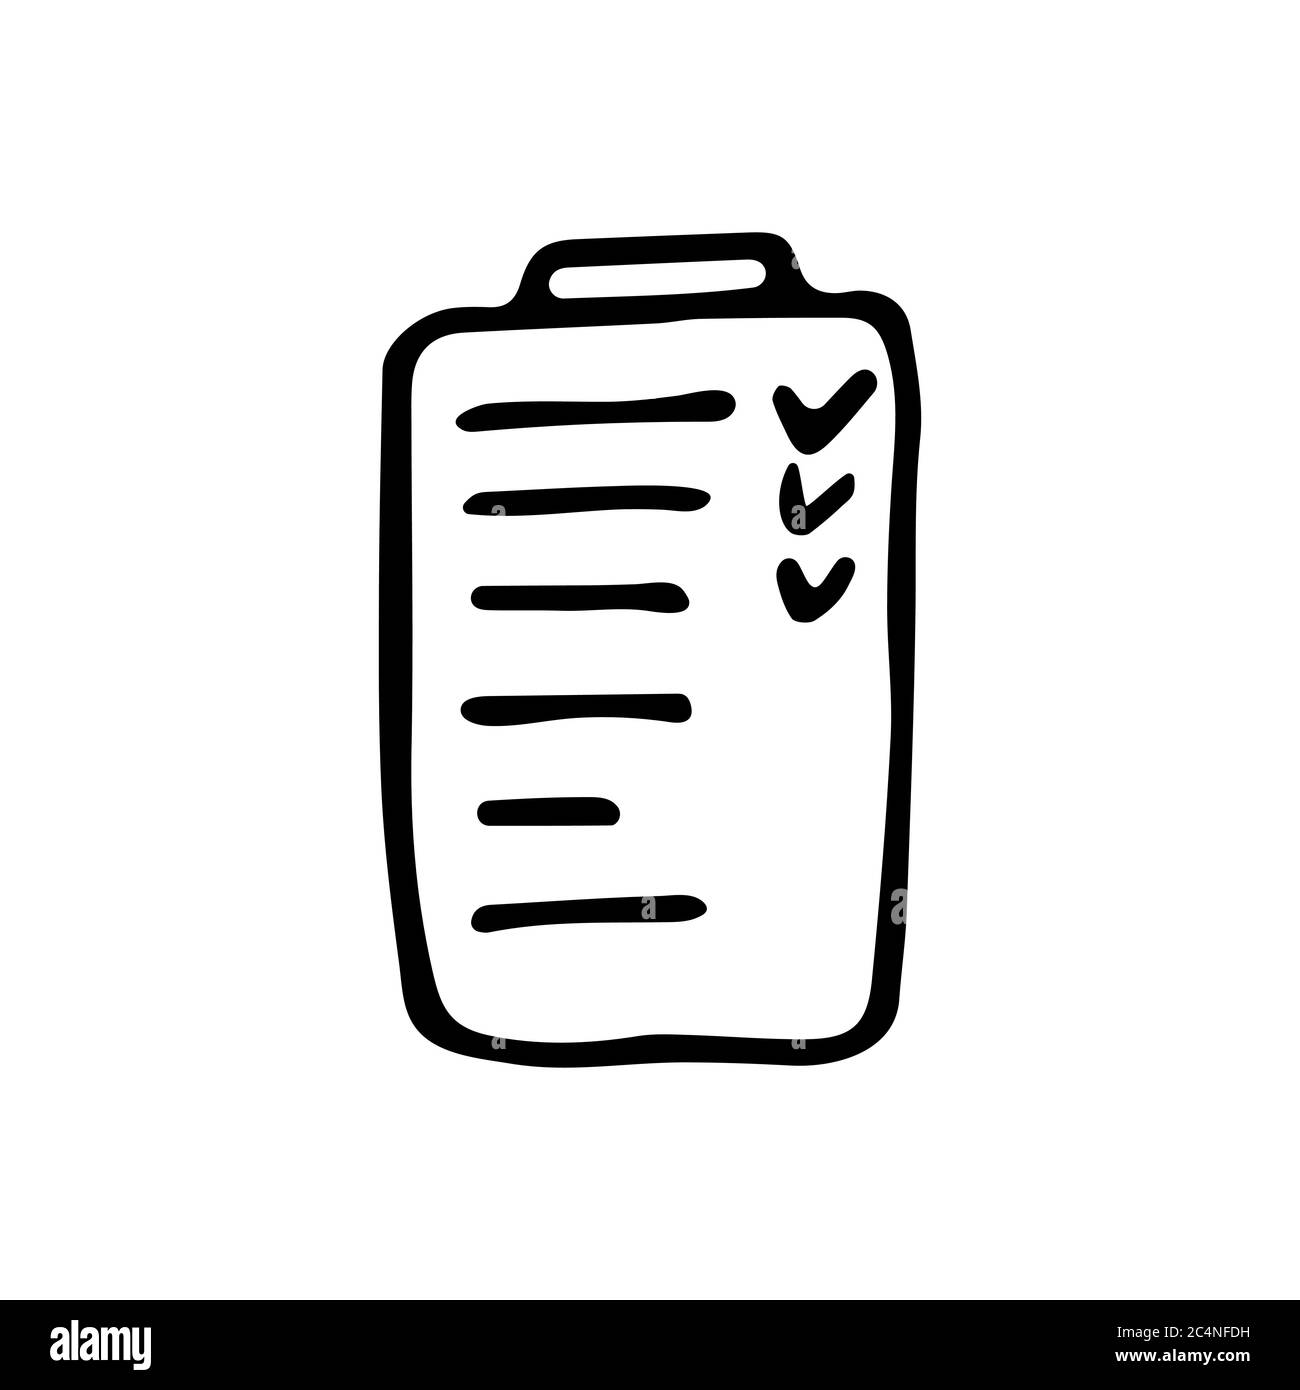 Checklist doodle icon. Hand drawn to-do list. Paper reminder icon. Vector graphics. Stock Vector